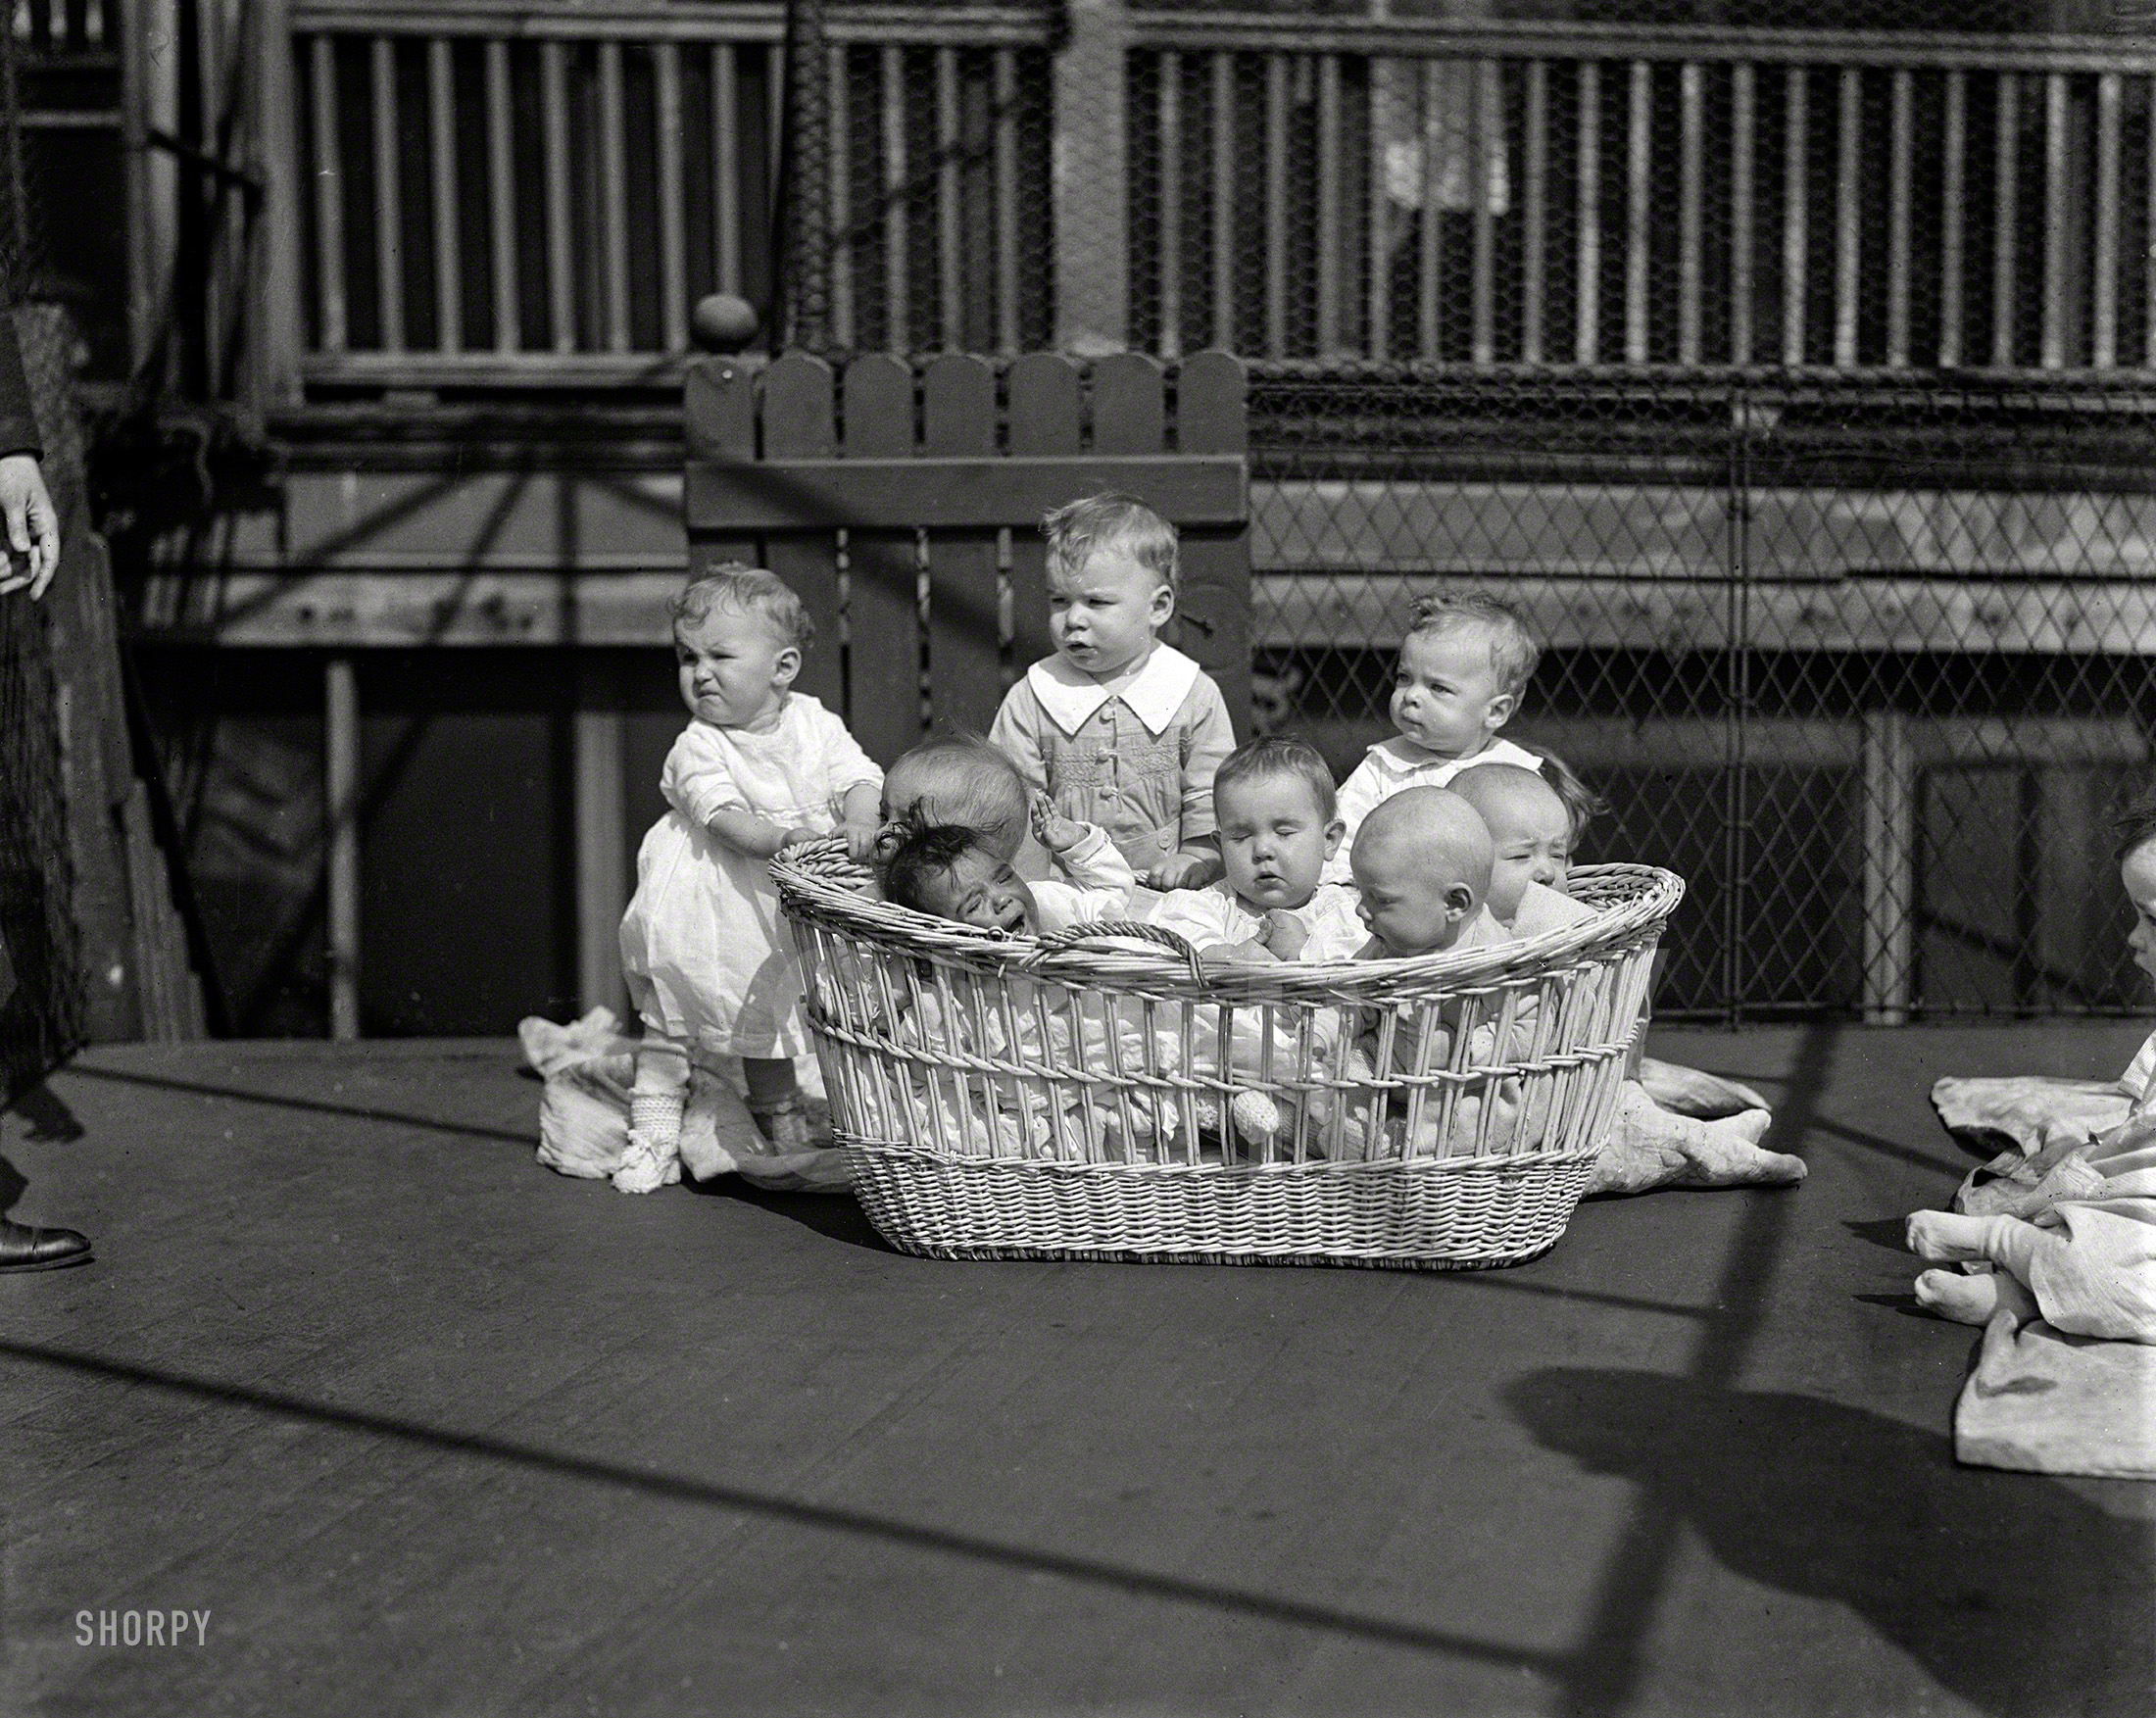 May 1923. "NO CAPTION (Babies in a basket)." We sense a baby rebellion brewing, instigated by the tot on the left. 4x5 inch glass negative. View full size.